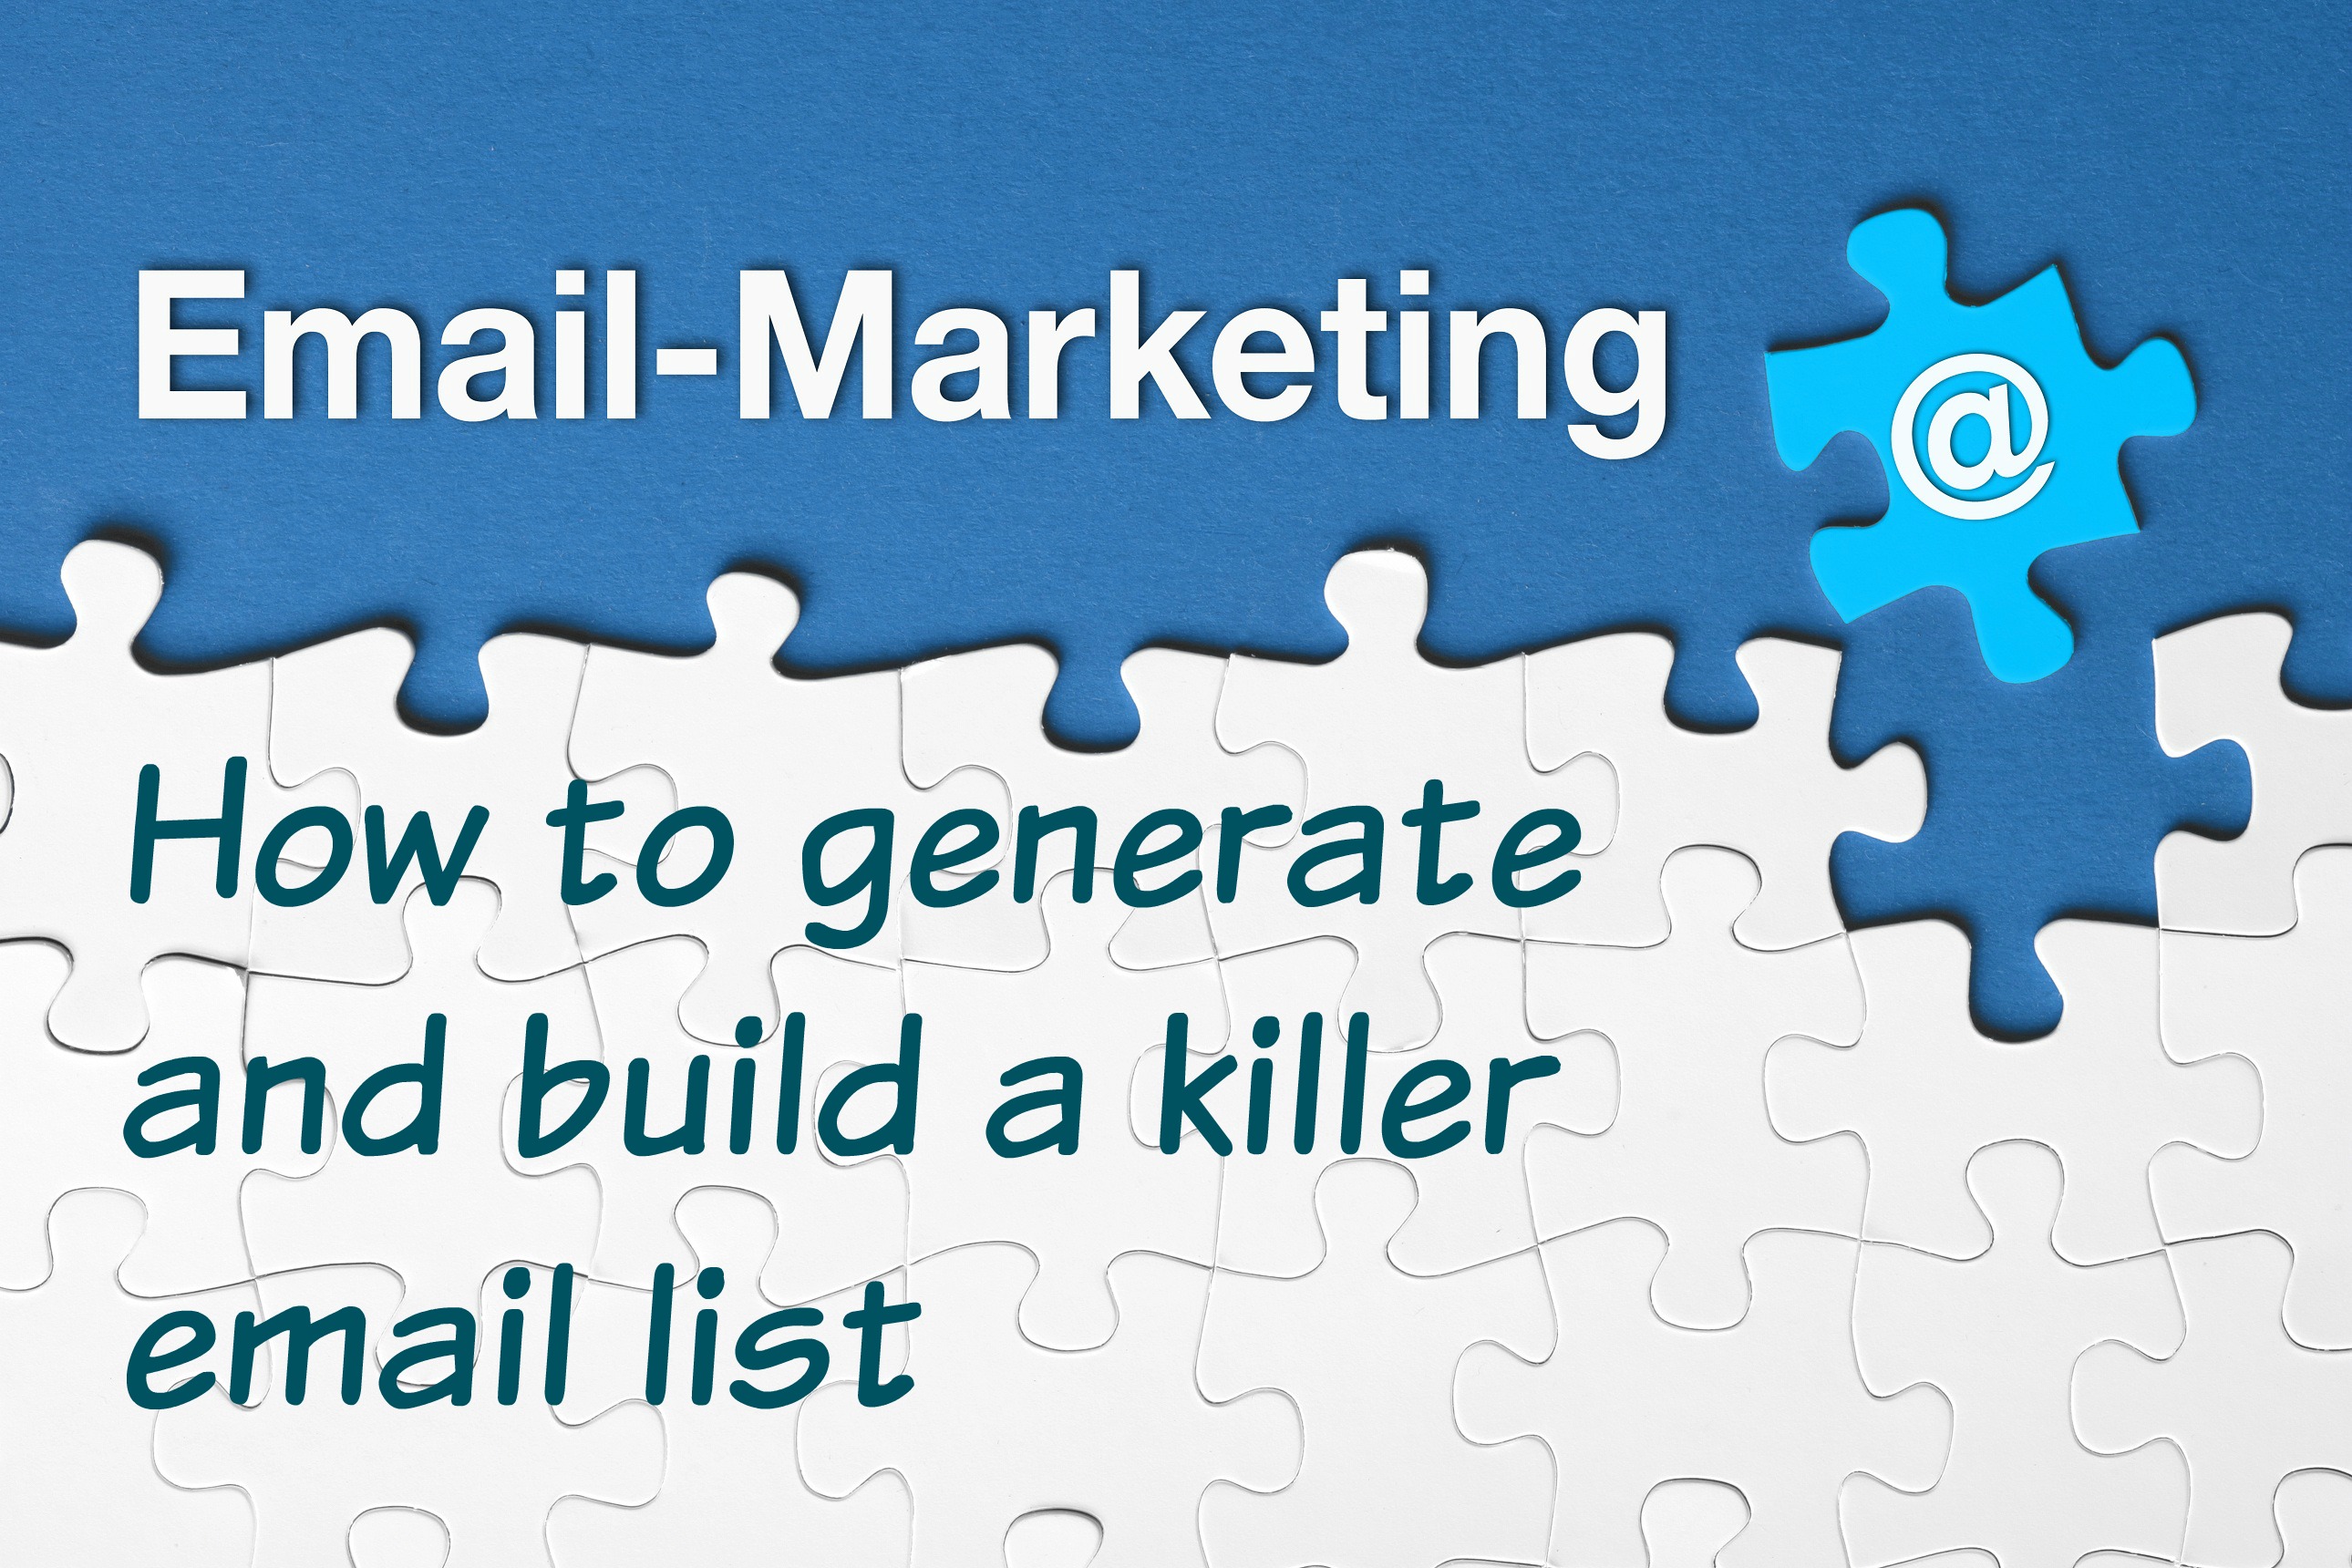 Power of building your email list